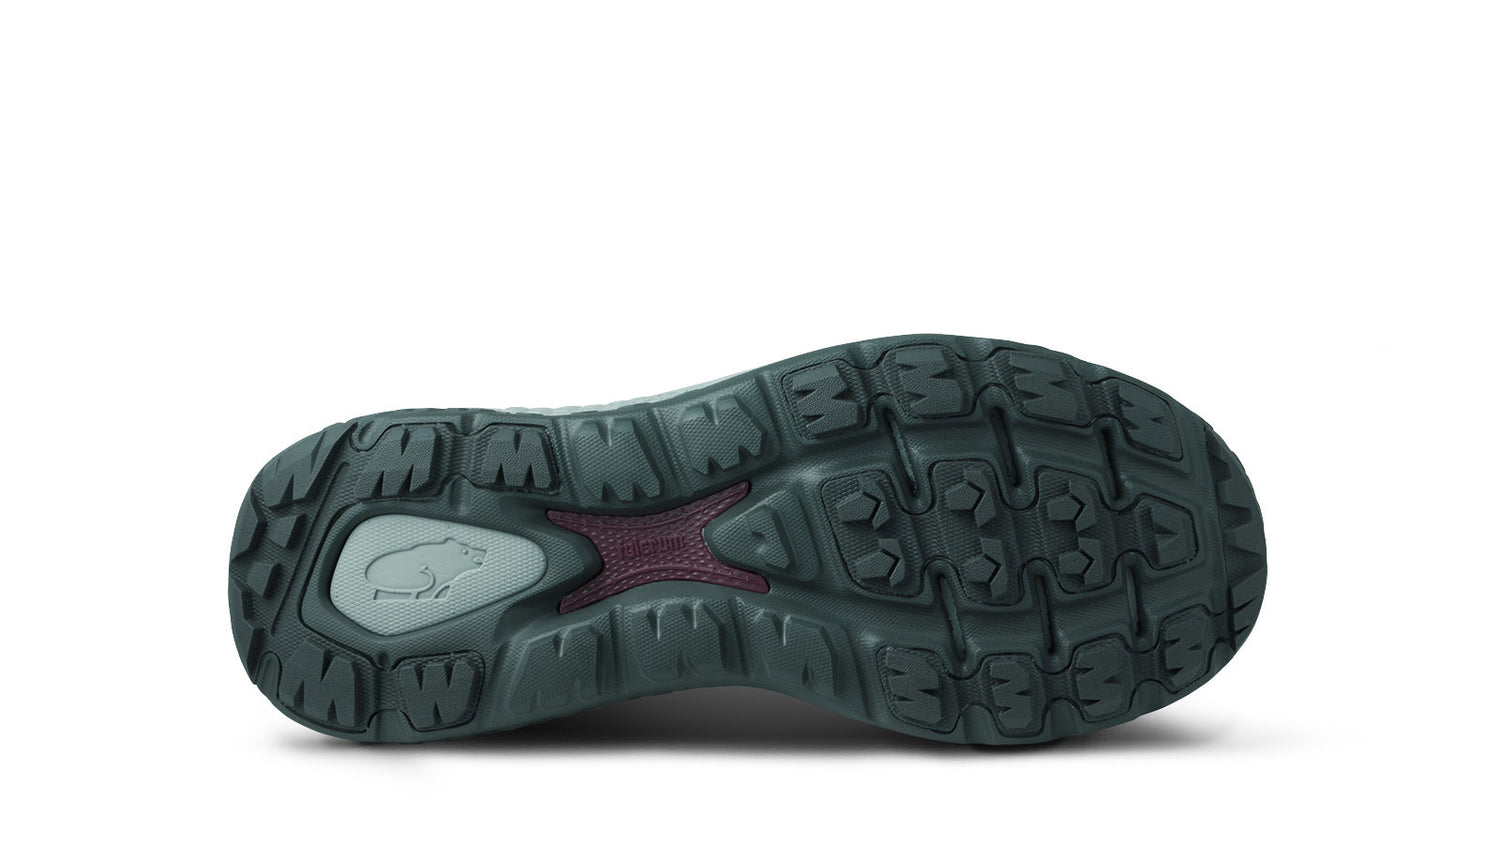 KARHU Ikoni Trail running shoe outsole with 5mm M- and T-lugs